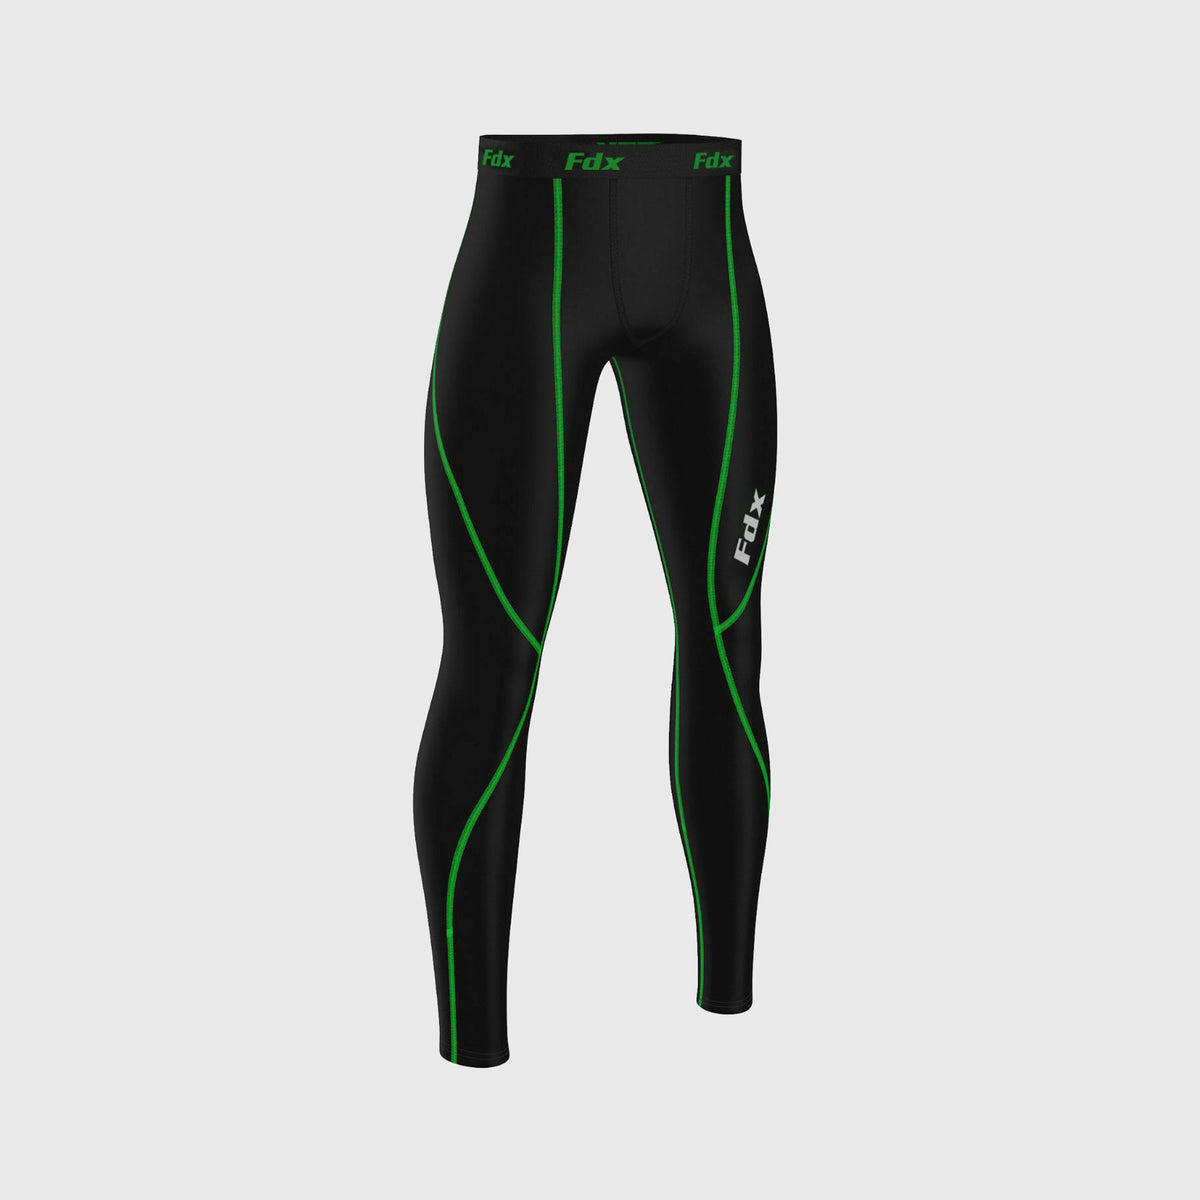 Skins A200 Men's Thermal Compression Long Tights  Compression tights men,  Compression clothing, Skins compression tights